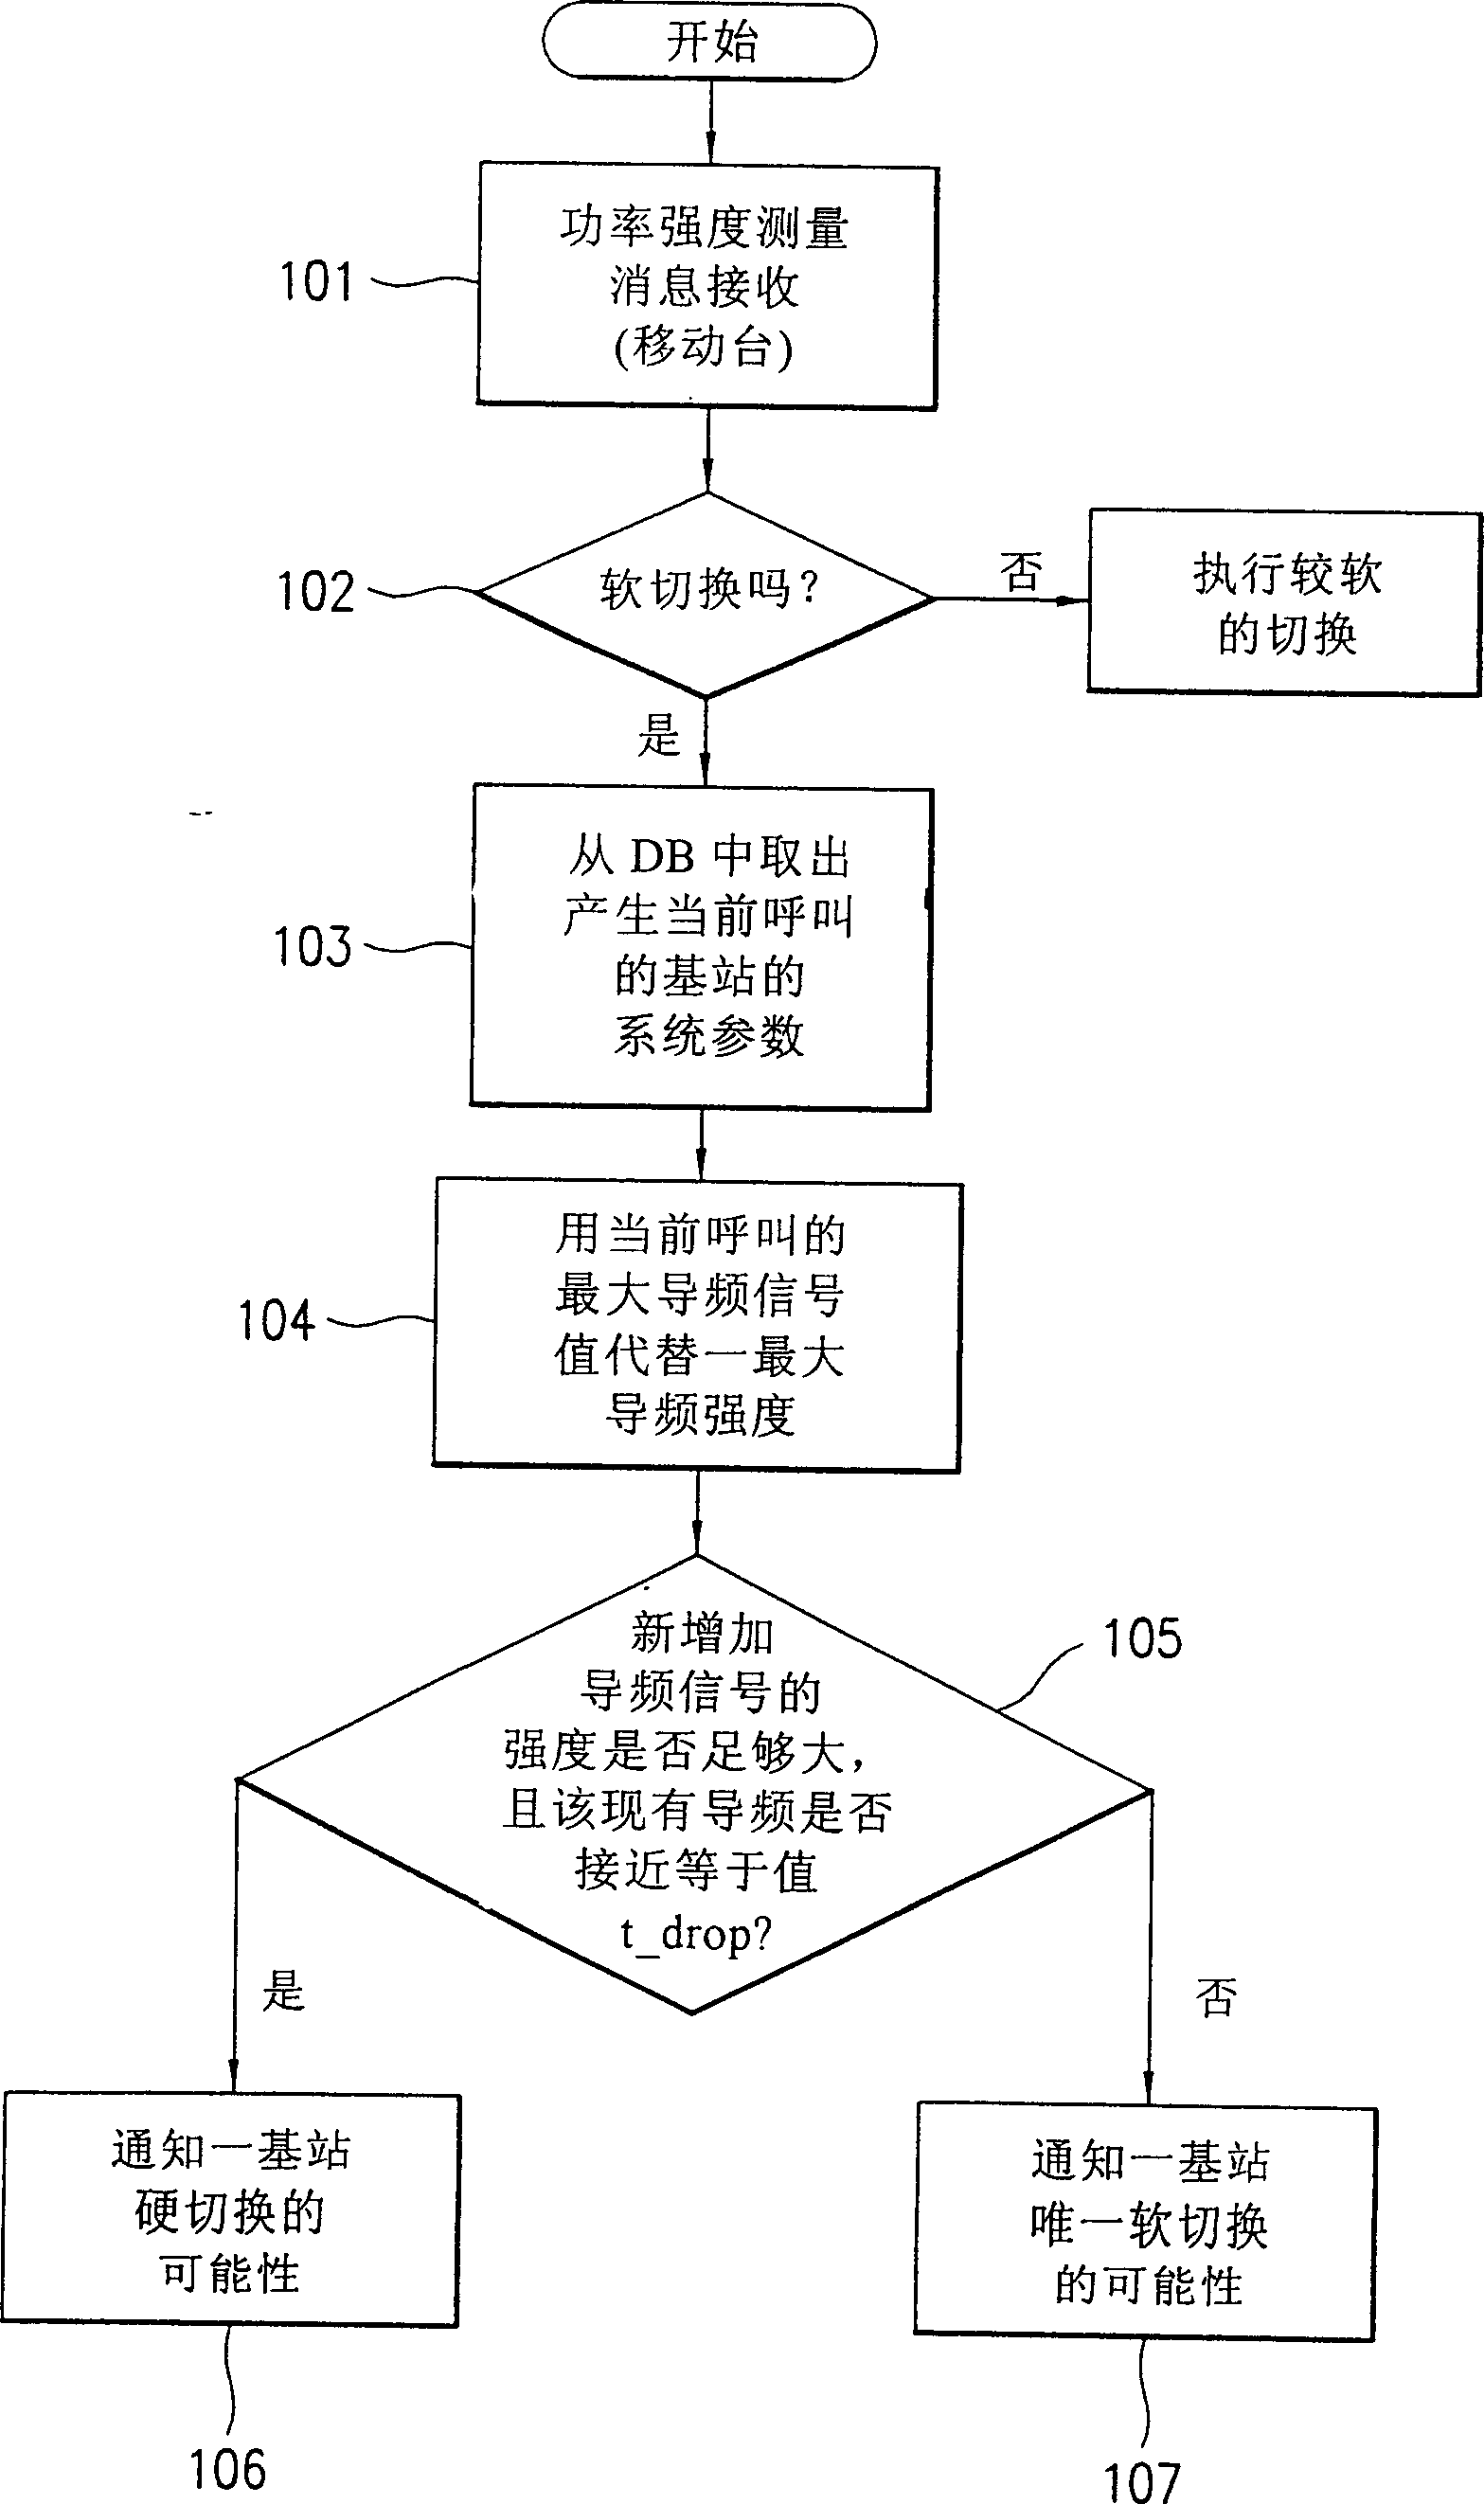 Method for reducing continuous hard handoffs between base stations in CDMA mobile communication system